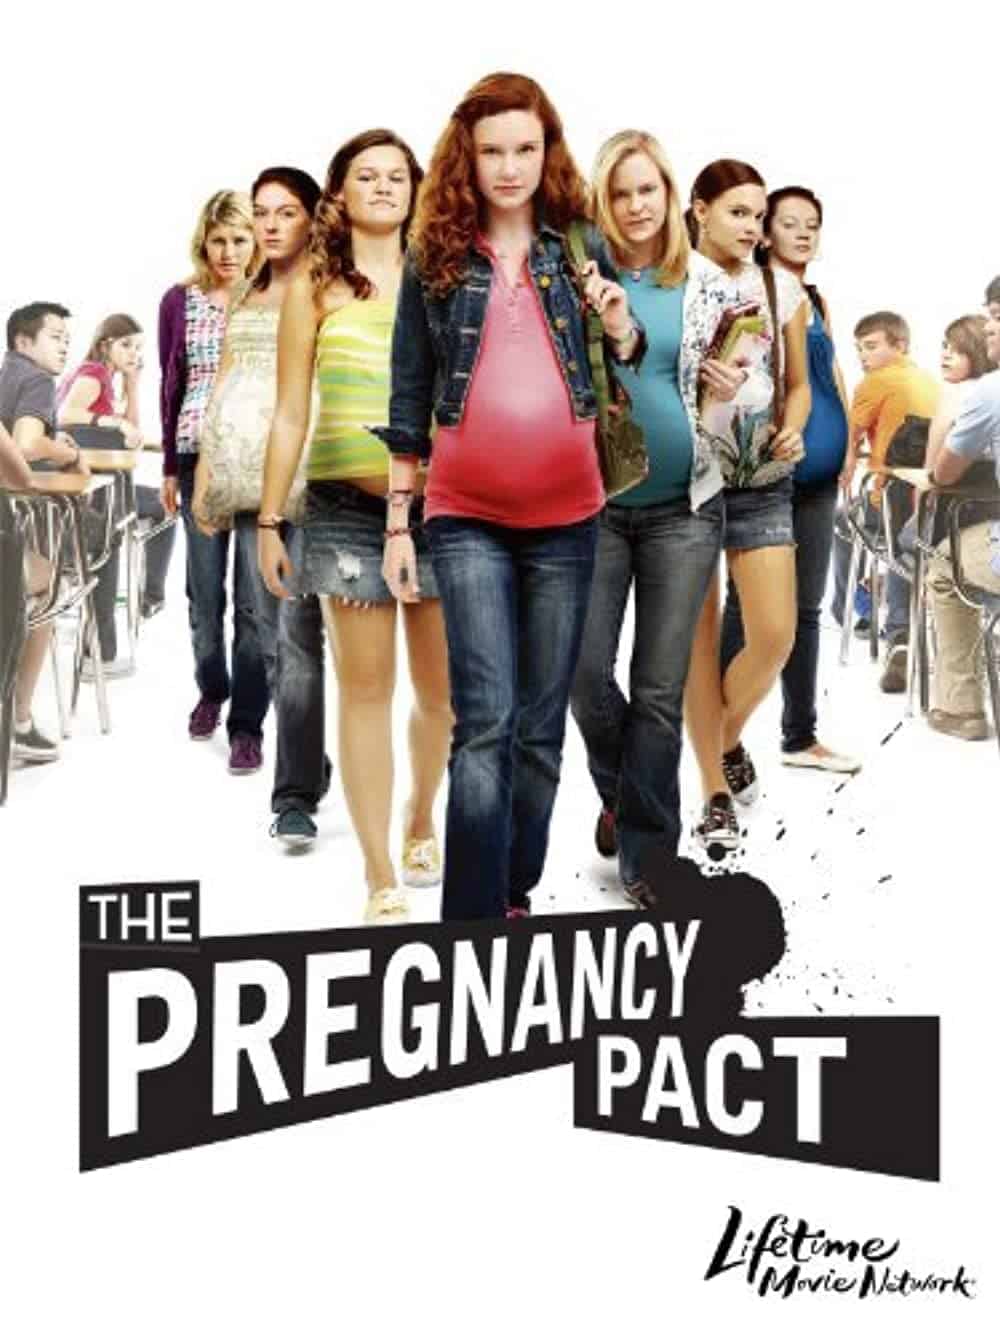 Pregnancy Pact Best Movies to Watch Drunk